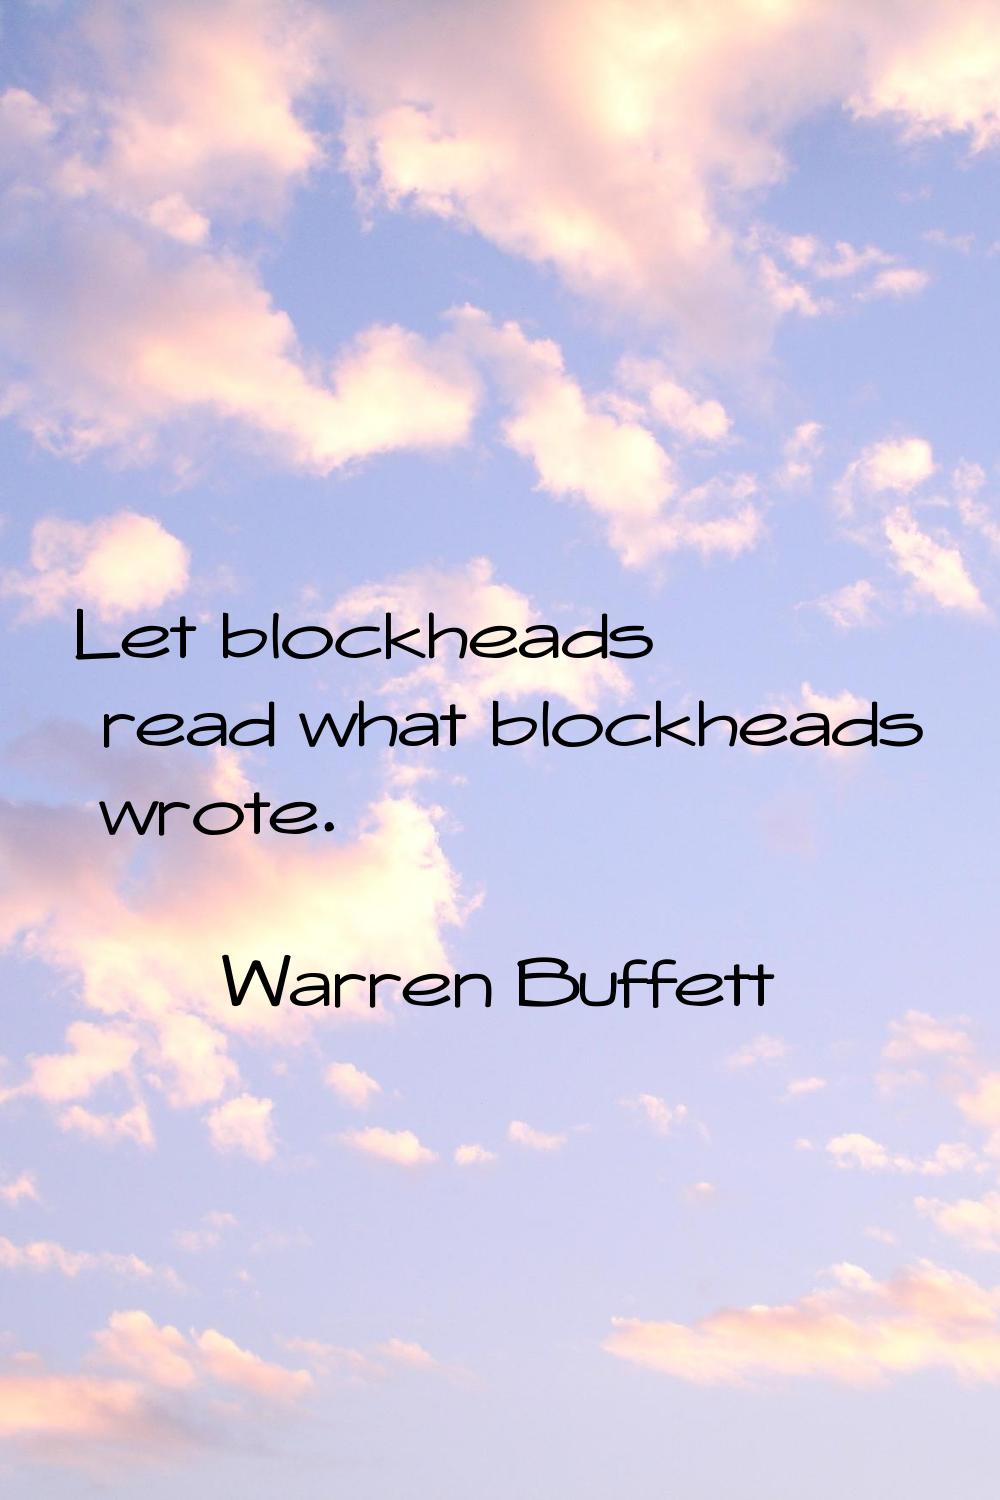 Let blockheads read what blockheads wrote.